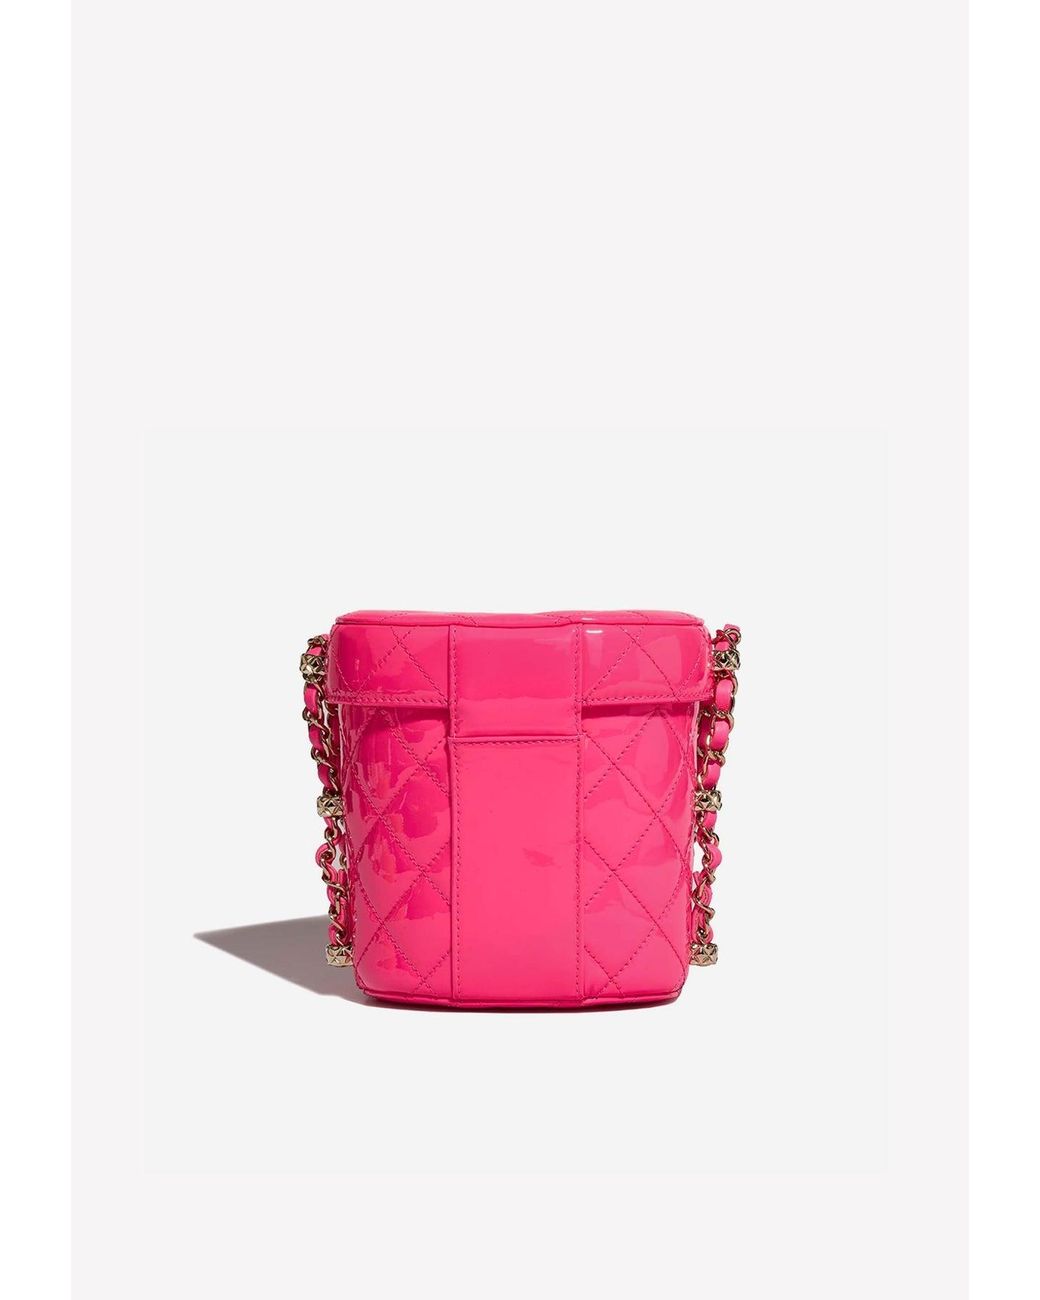 Neon-pink Chain Decor Quilted Flap Square Bag